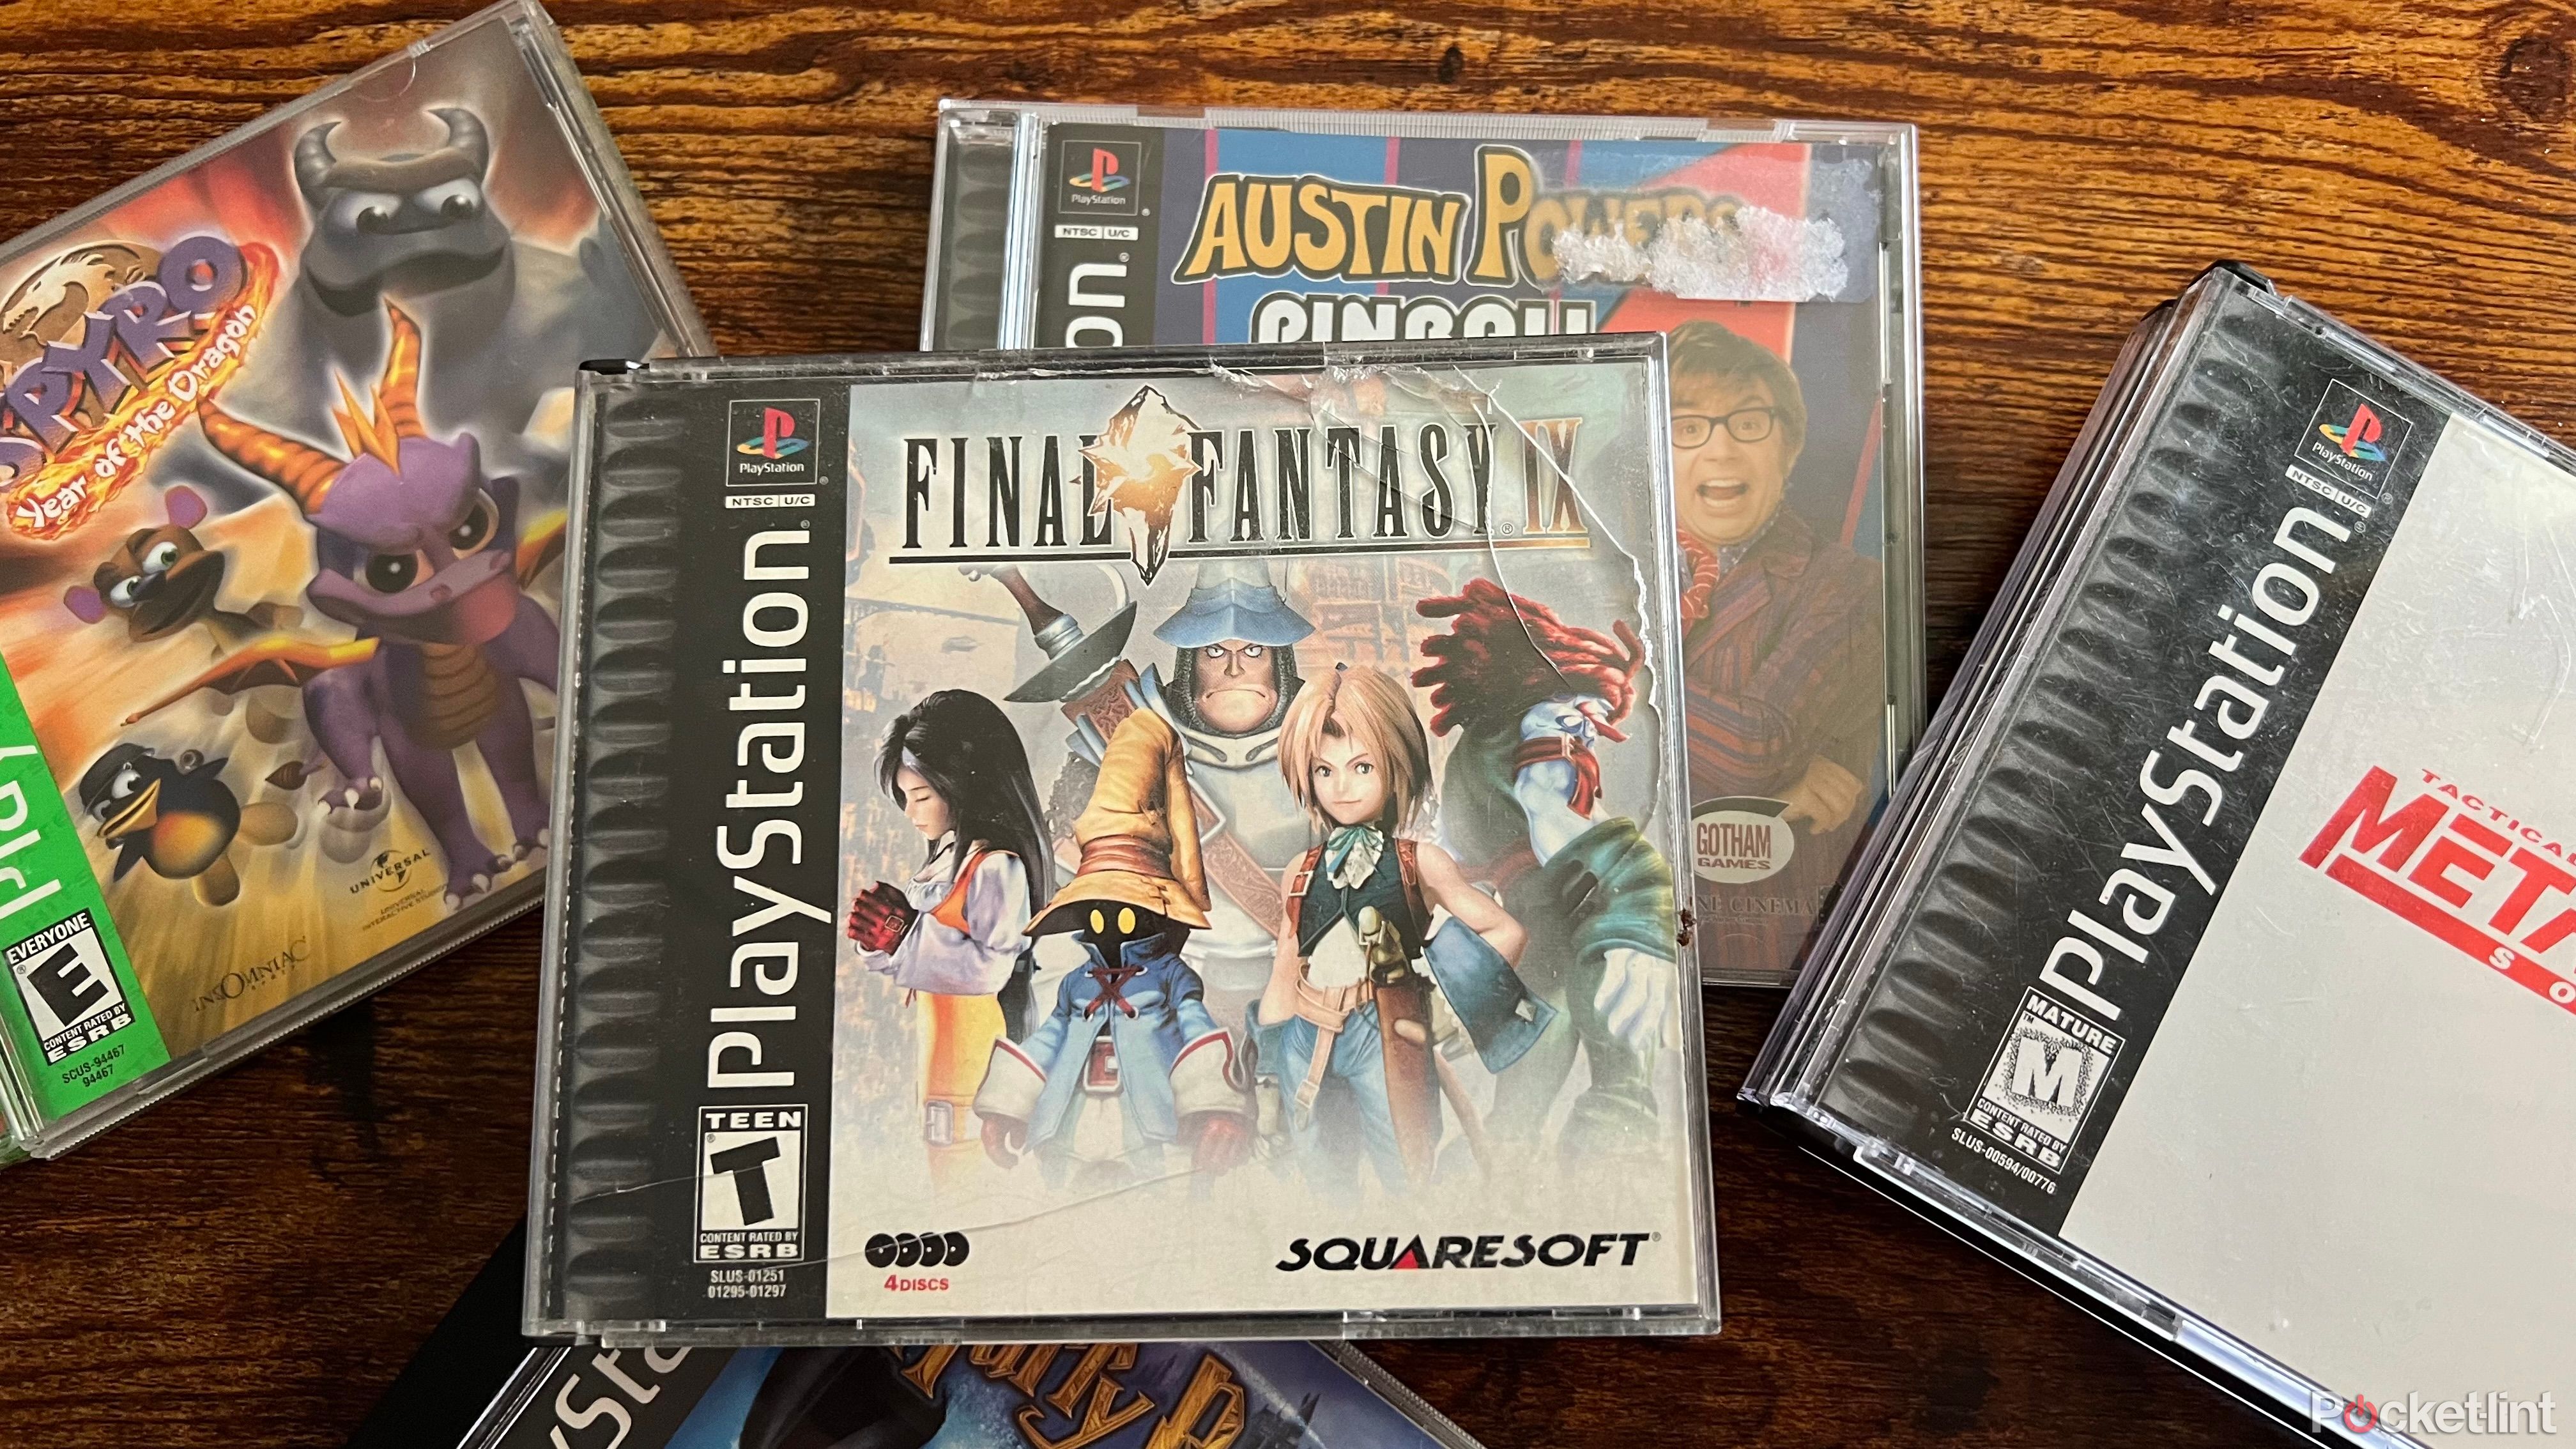 PlayStation games like Final Fantasy 9, Spyro, Austin Powers, and more. 